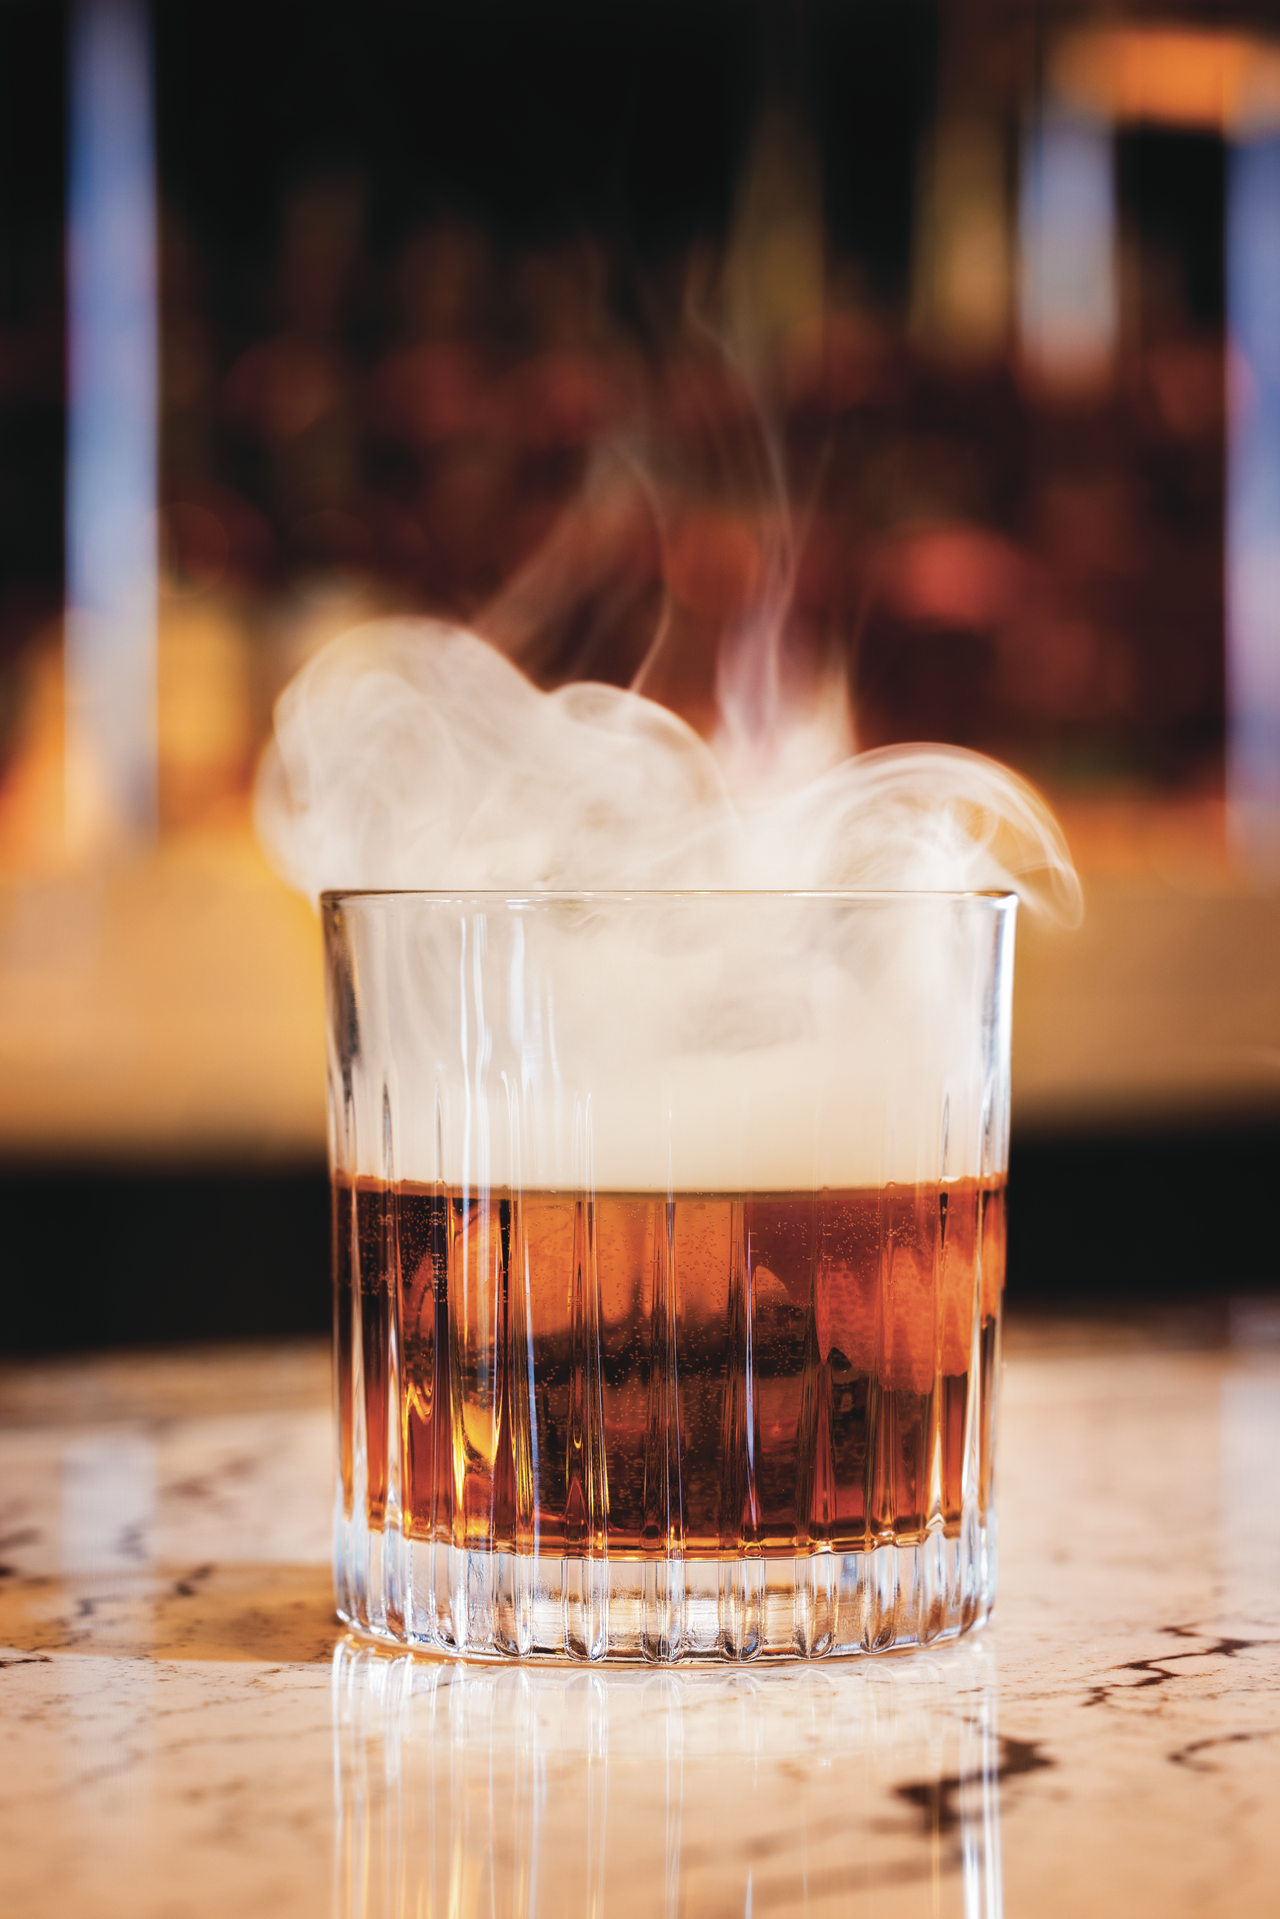 Pair your meal with an Old Fashioned.